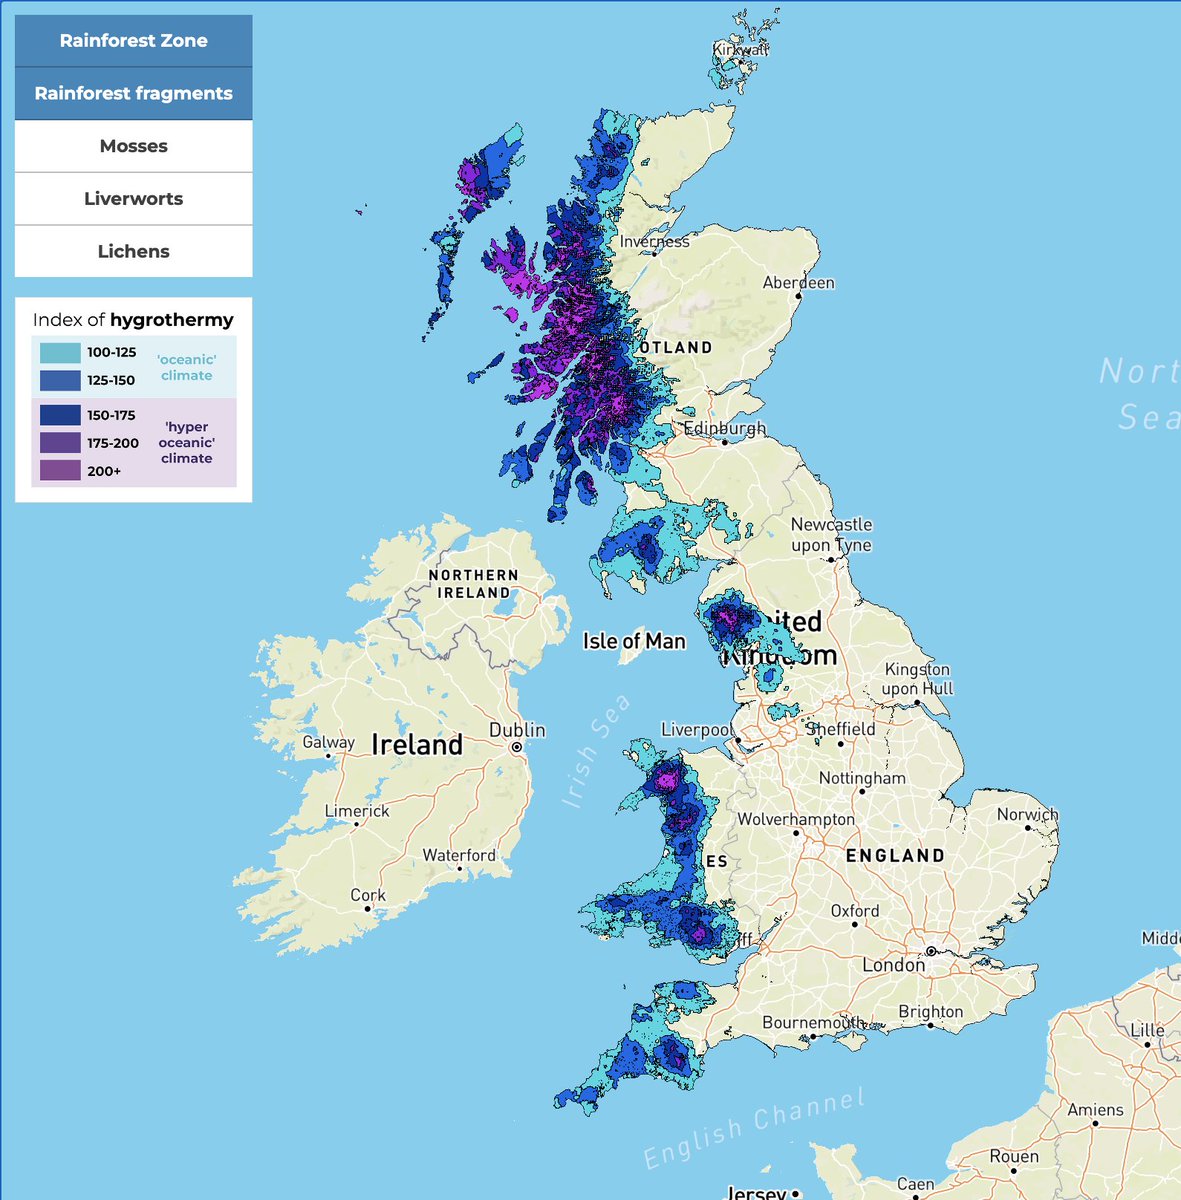 Let's bring back Britain's lost rainforests! Our new maps show that 20% of Britain has a climate suitable for temperate rainforest, but that rainforest now covers just 1% of the country. Interactive map here: map.lostrainforestsofbritain.org Guardian article: theguardian.com/environment/20…